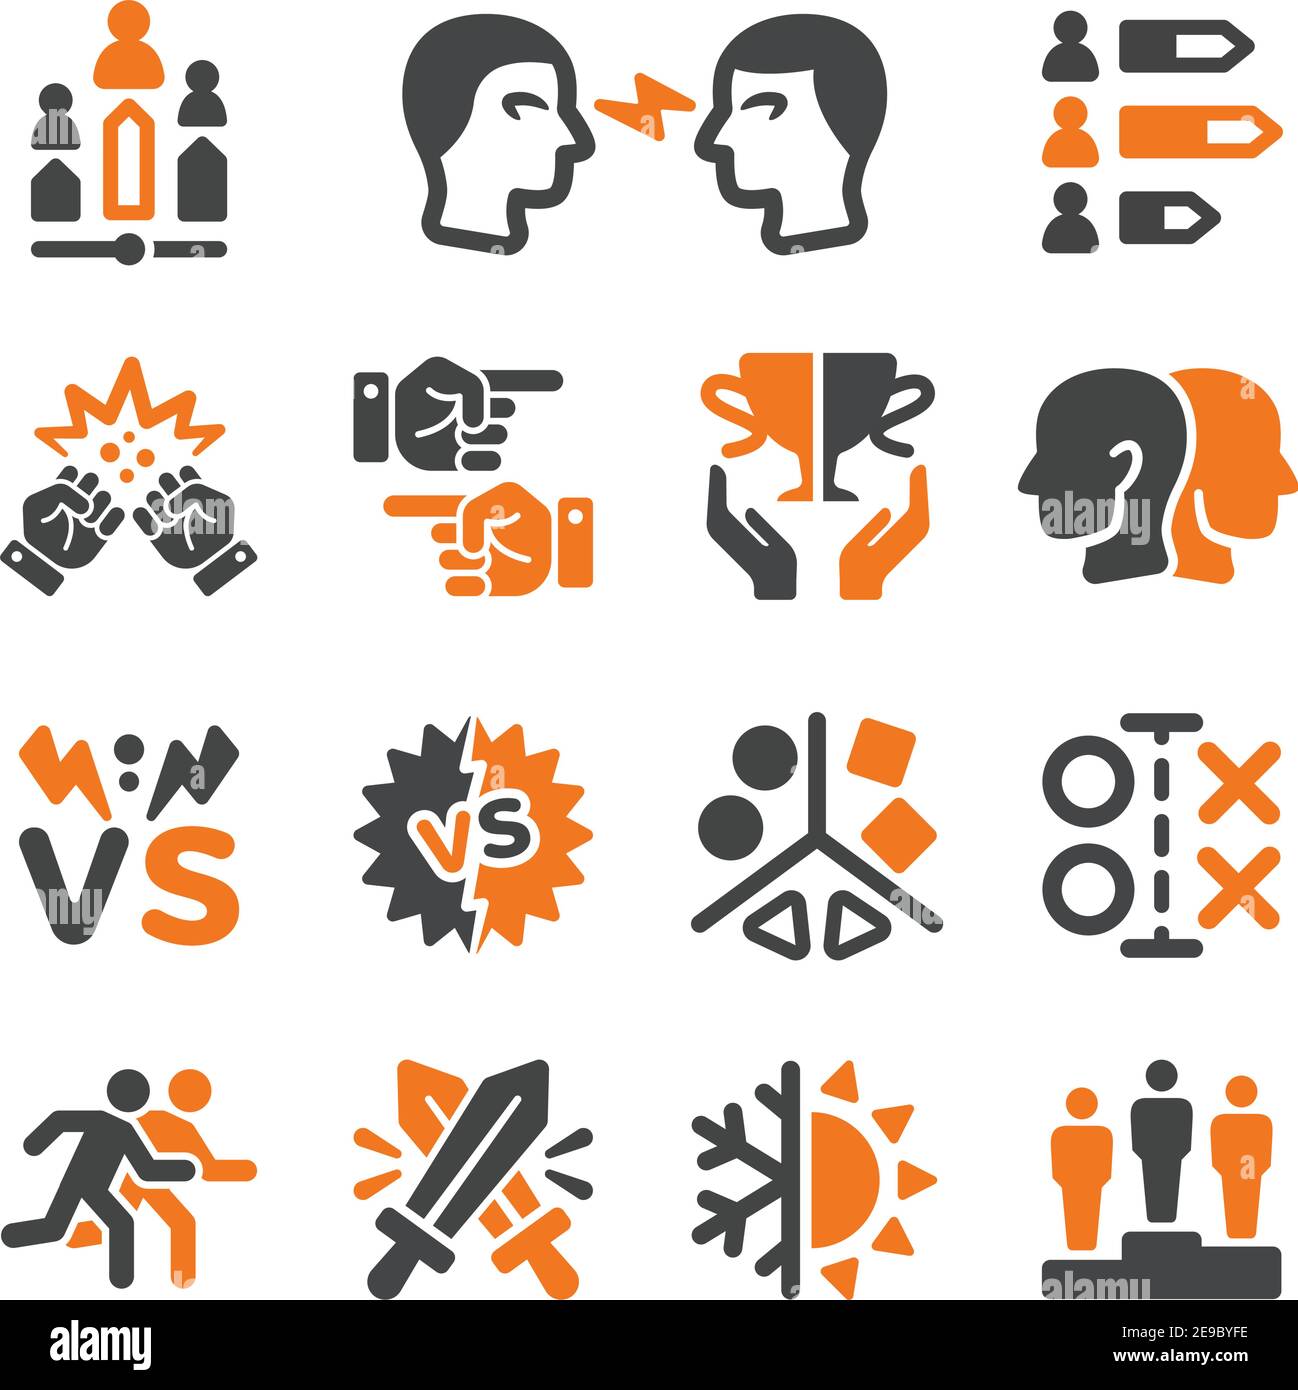 rival,enemy icon set,vector and illustration Stock Vector